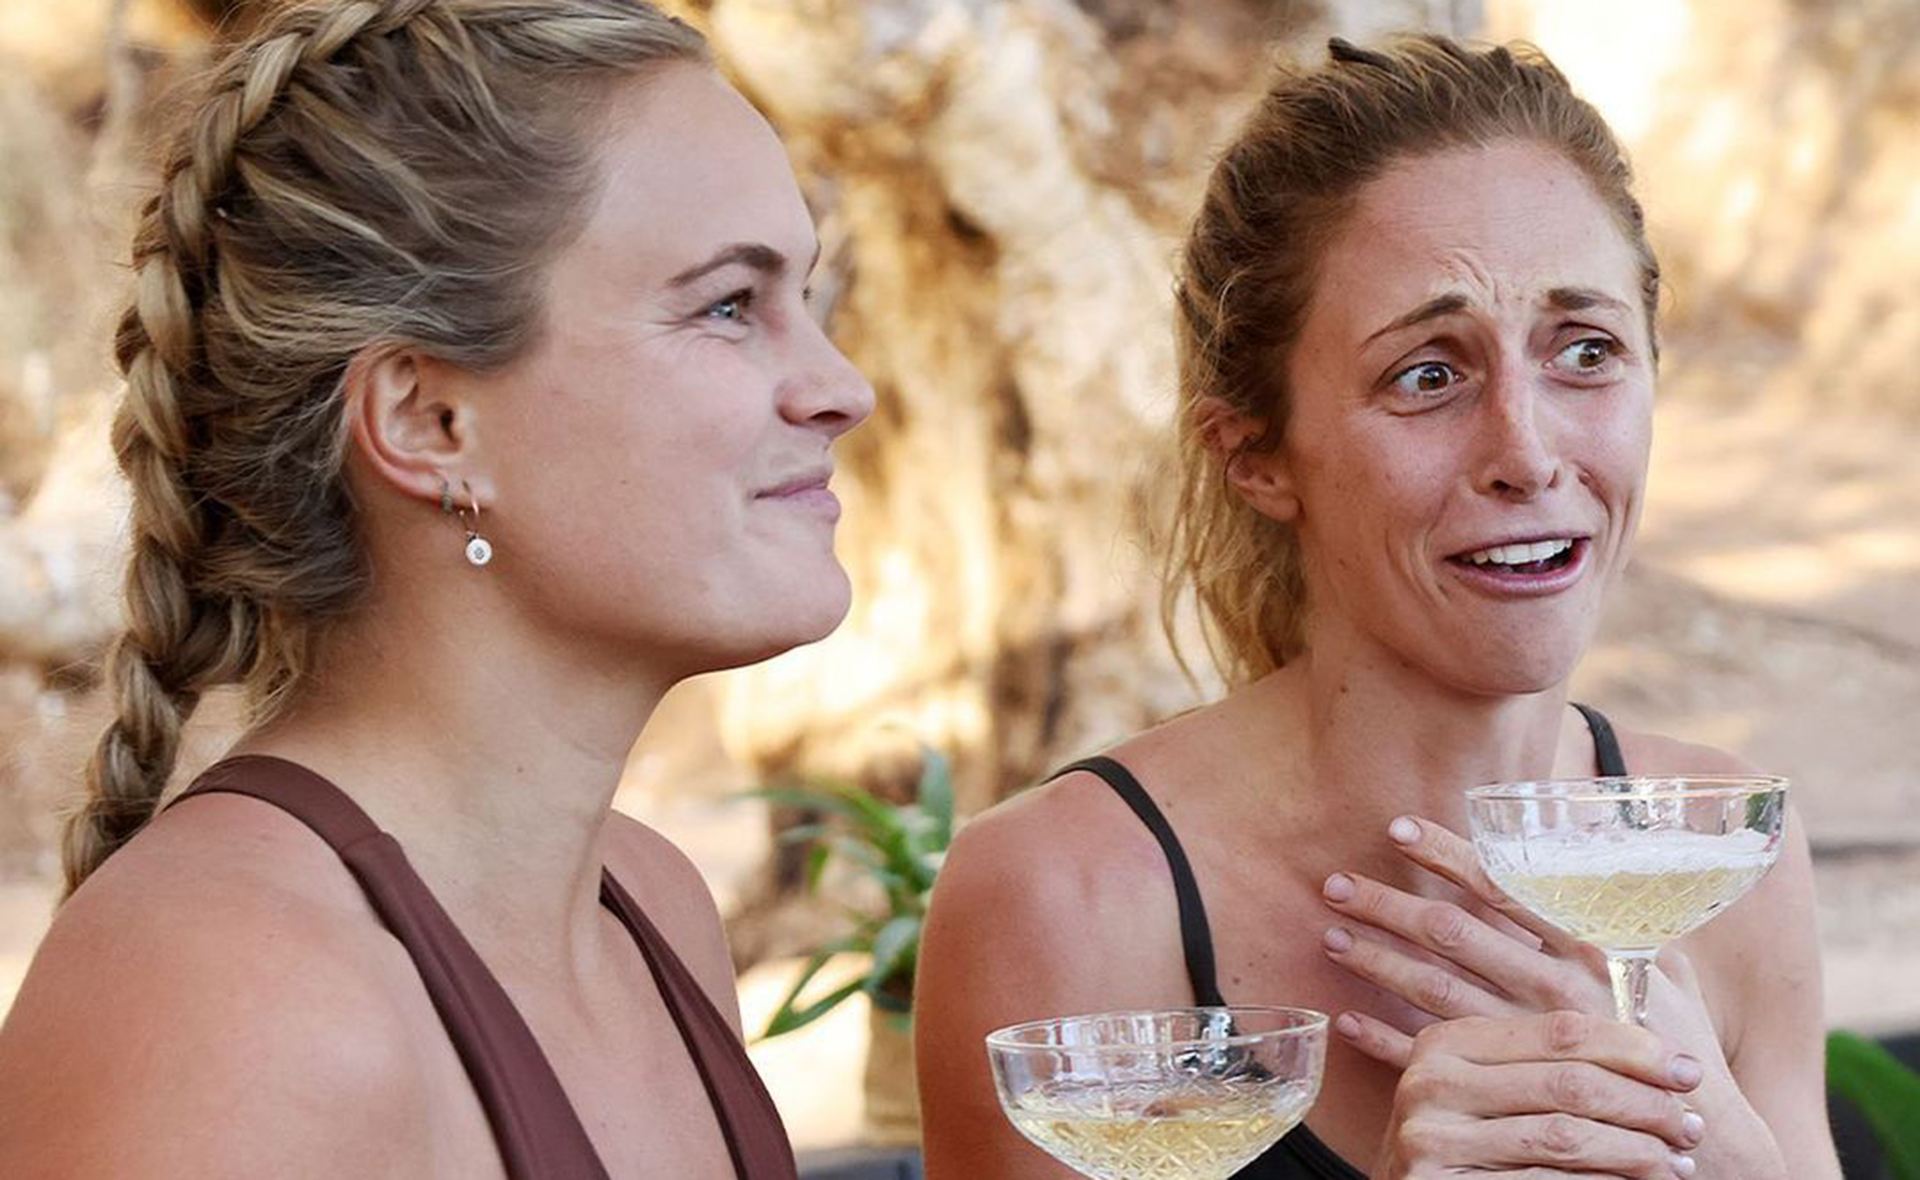 “This looks like torture”: All the best reactions to the Australian Survivor 2021 finale